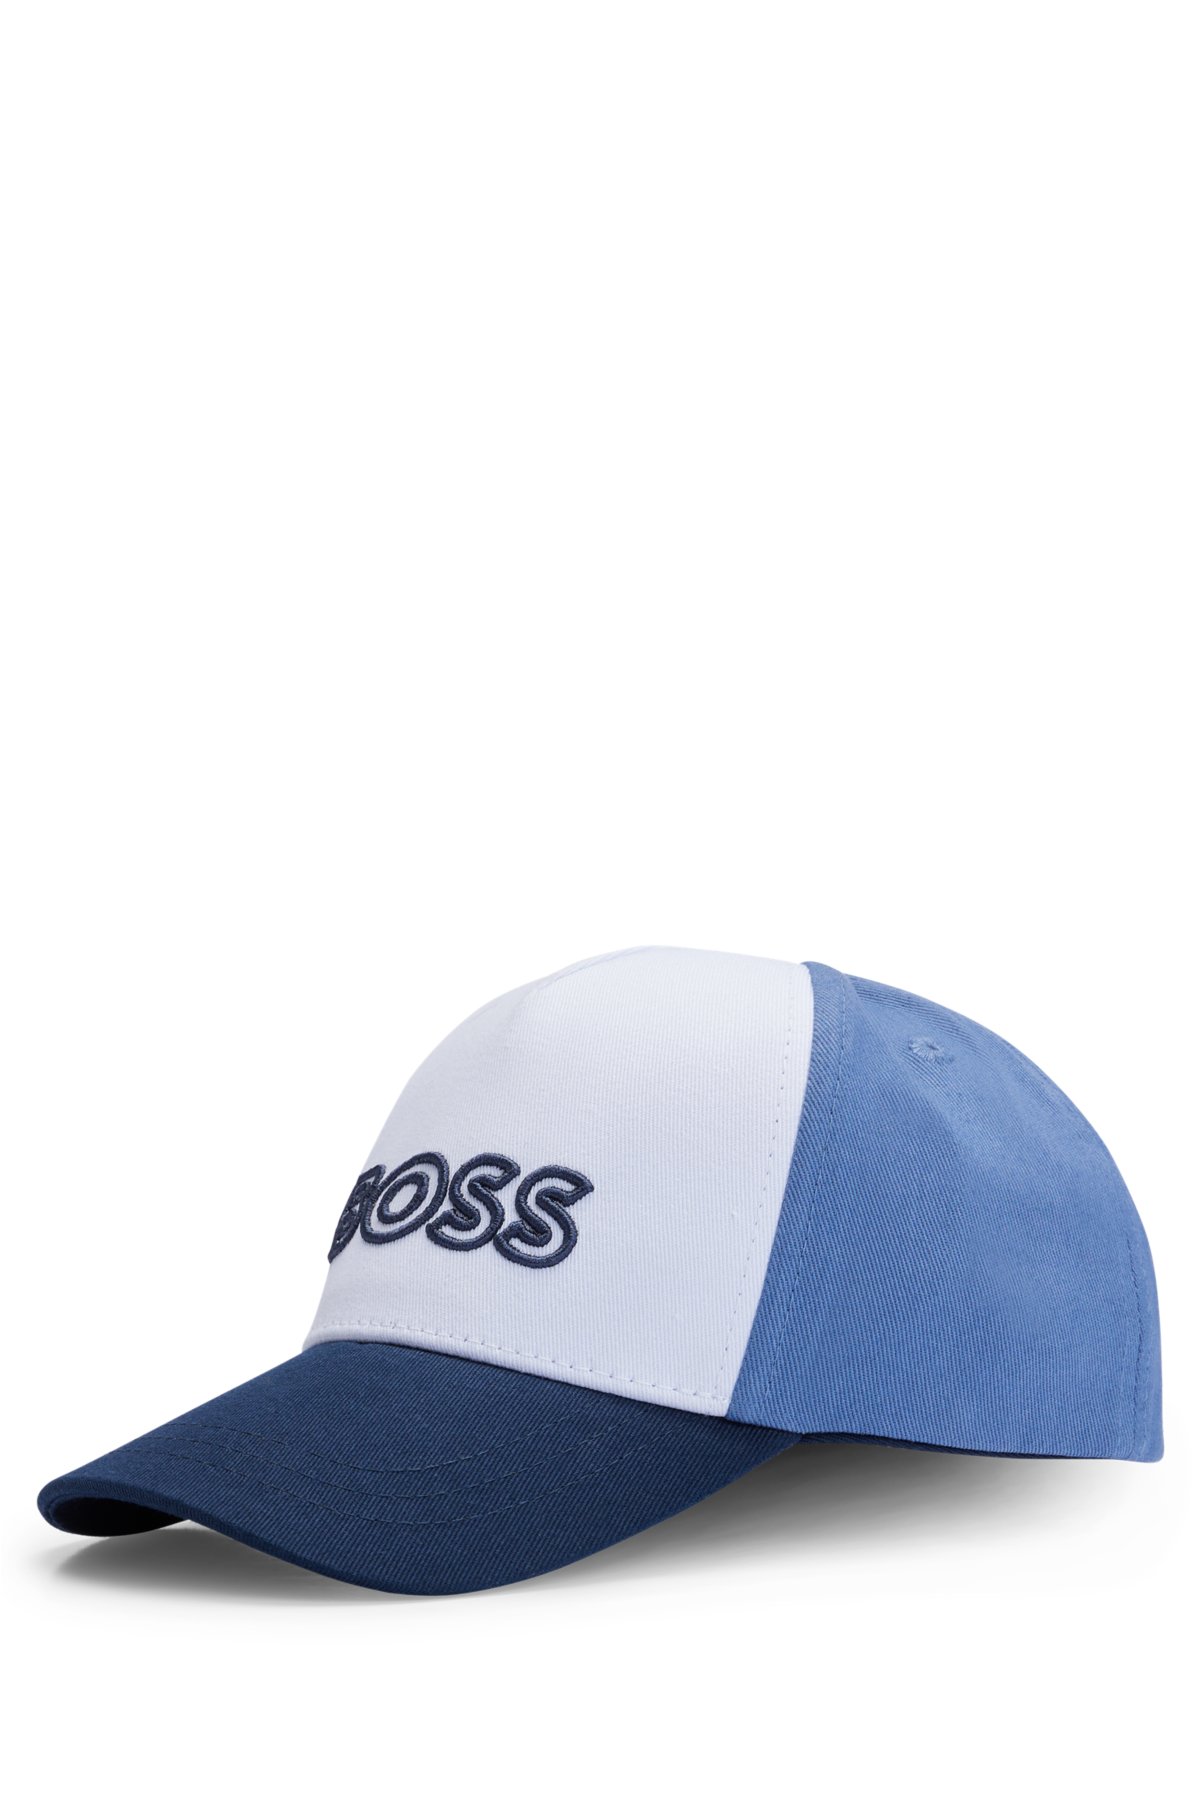 Kids' cap in cotton twill with logo print, White